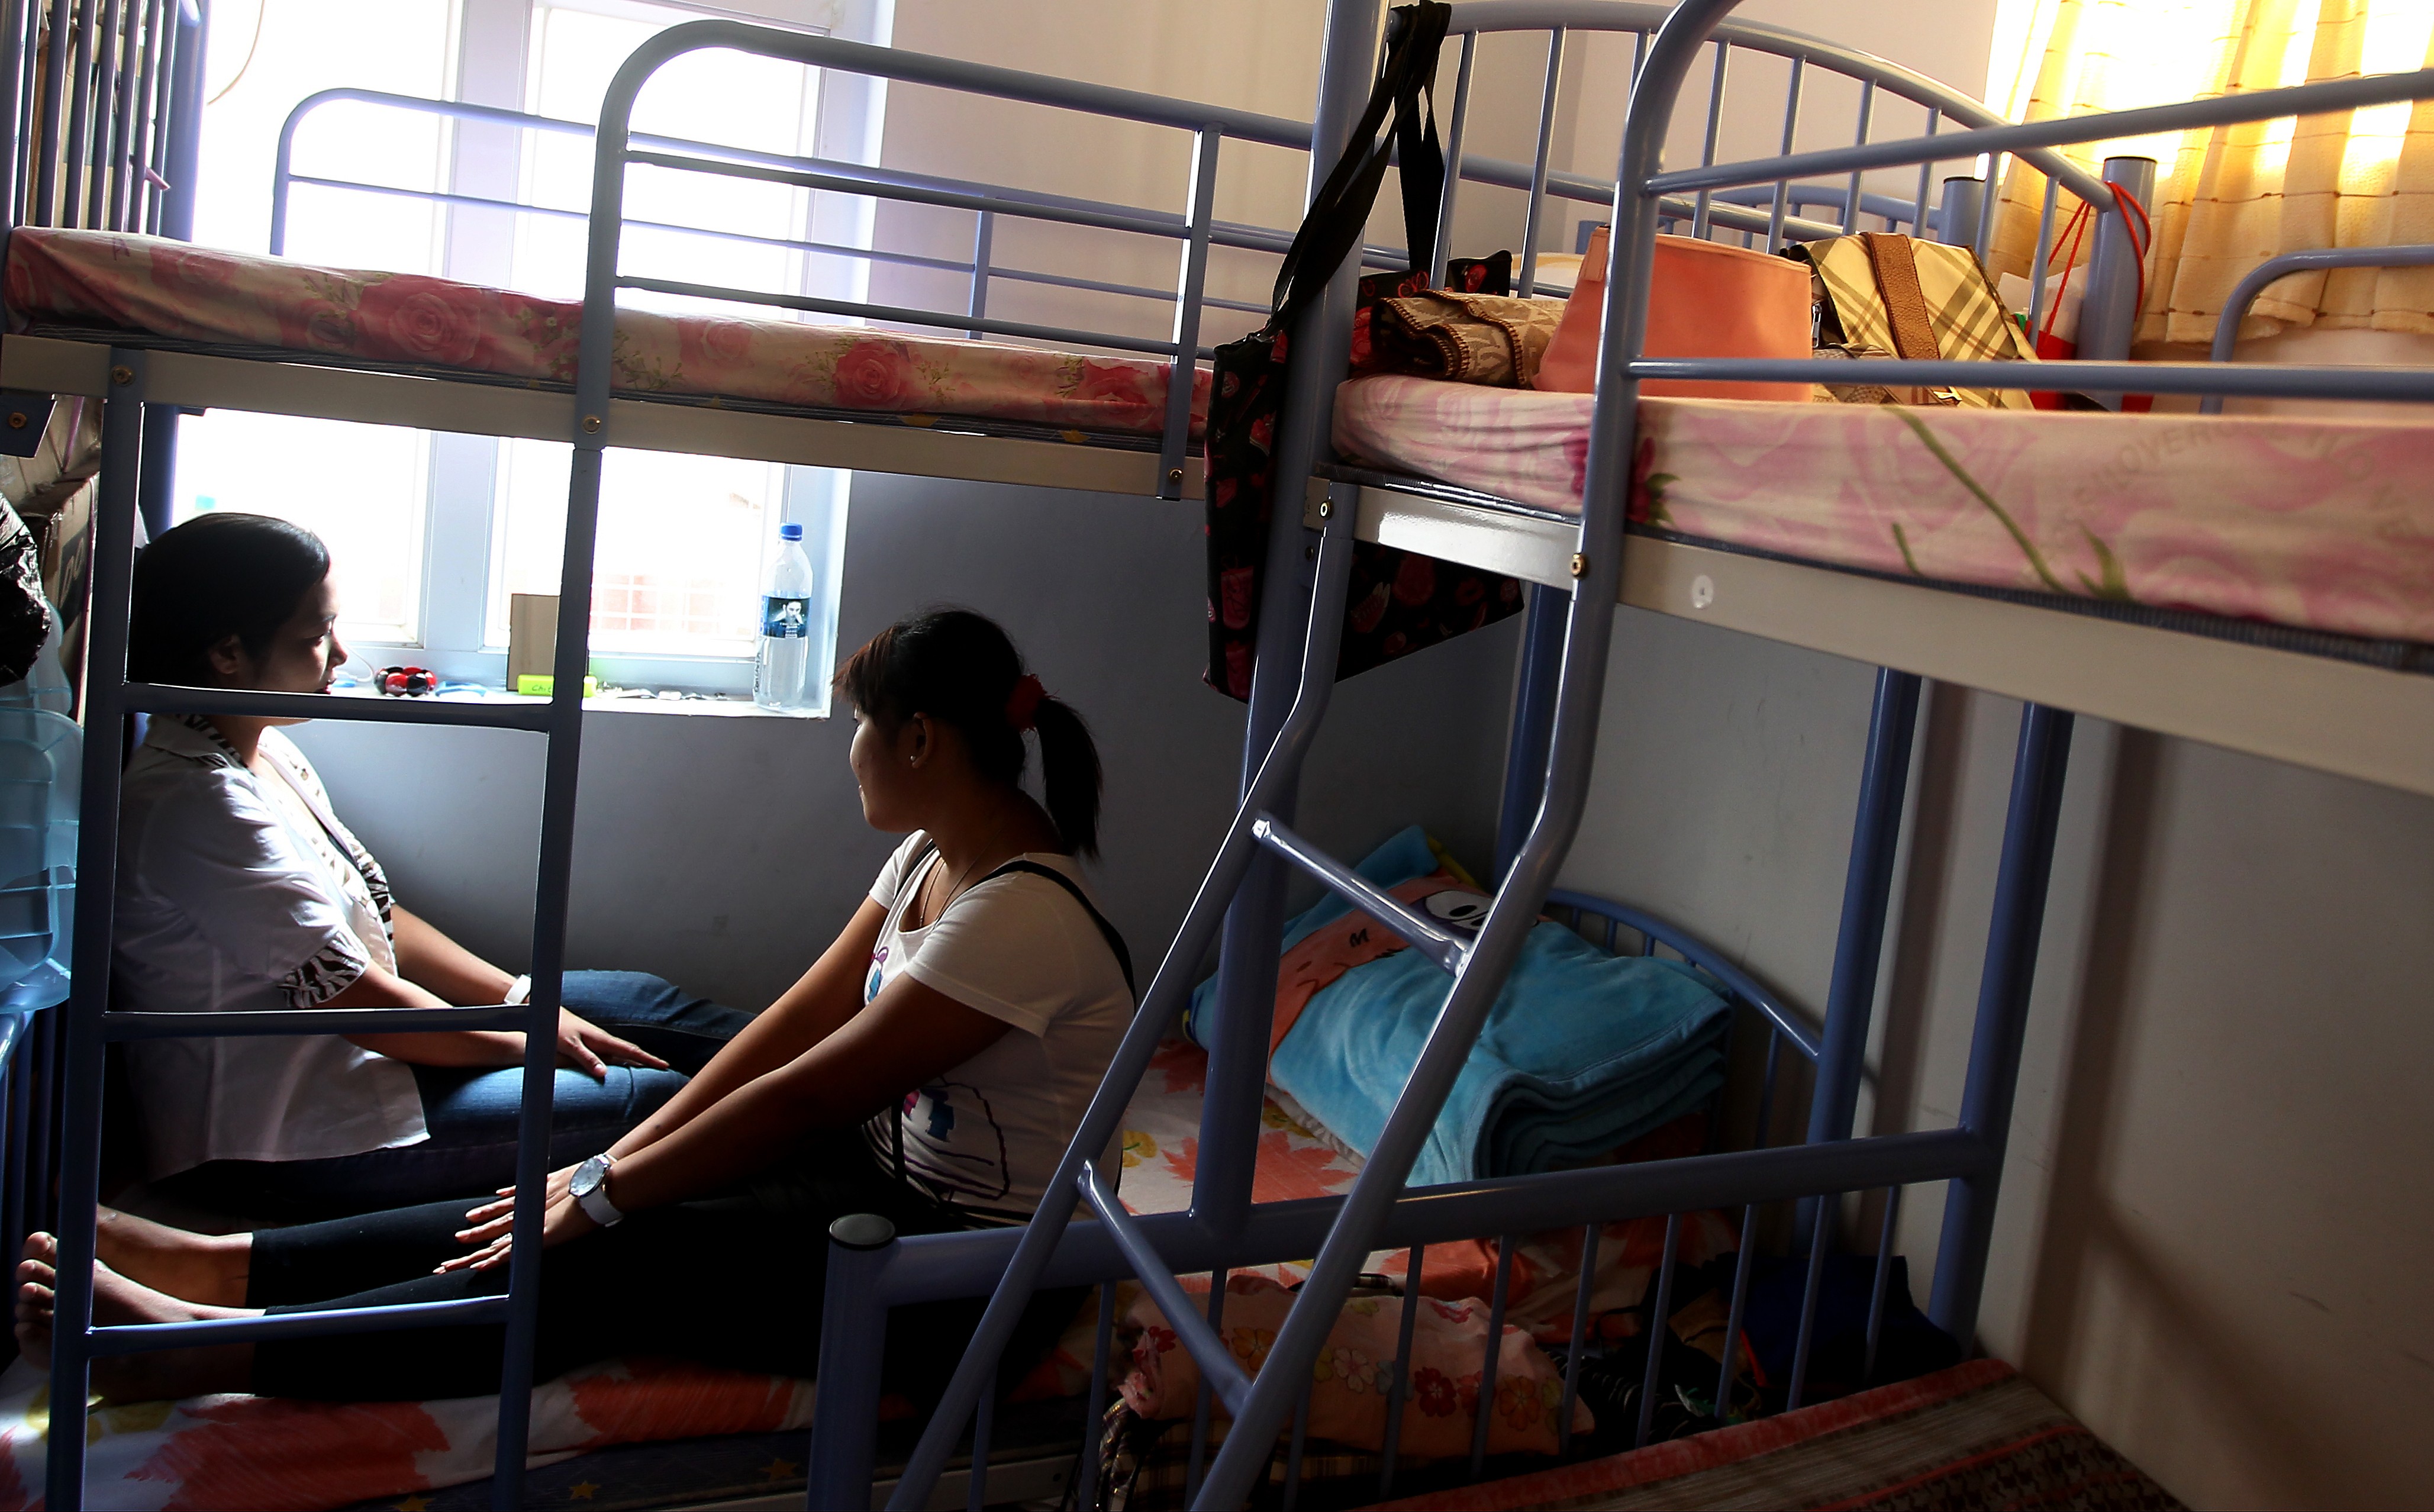 Two domestic workers find shelter in the Bethune House Migrant Women’s Refuge after running into difficulties. Photo: Jonathan Wong